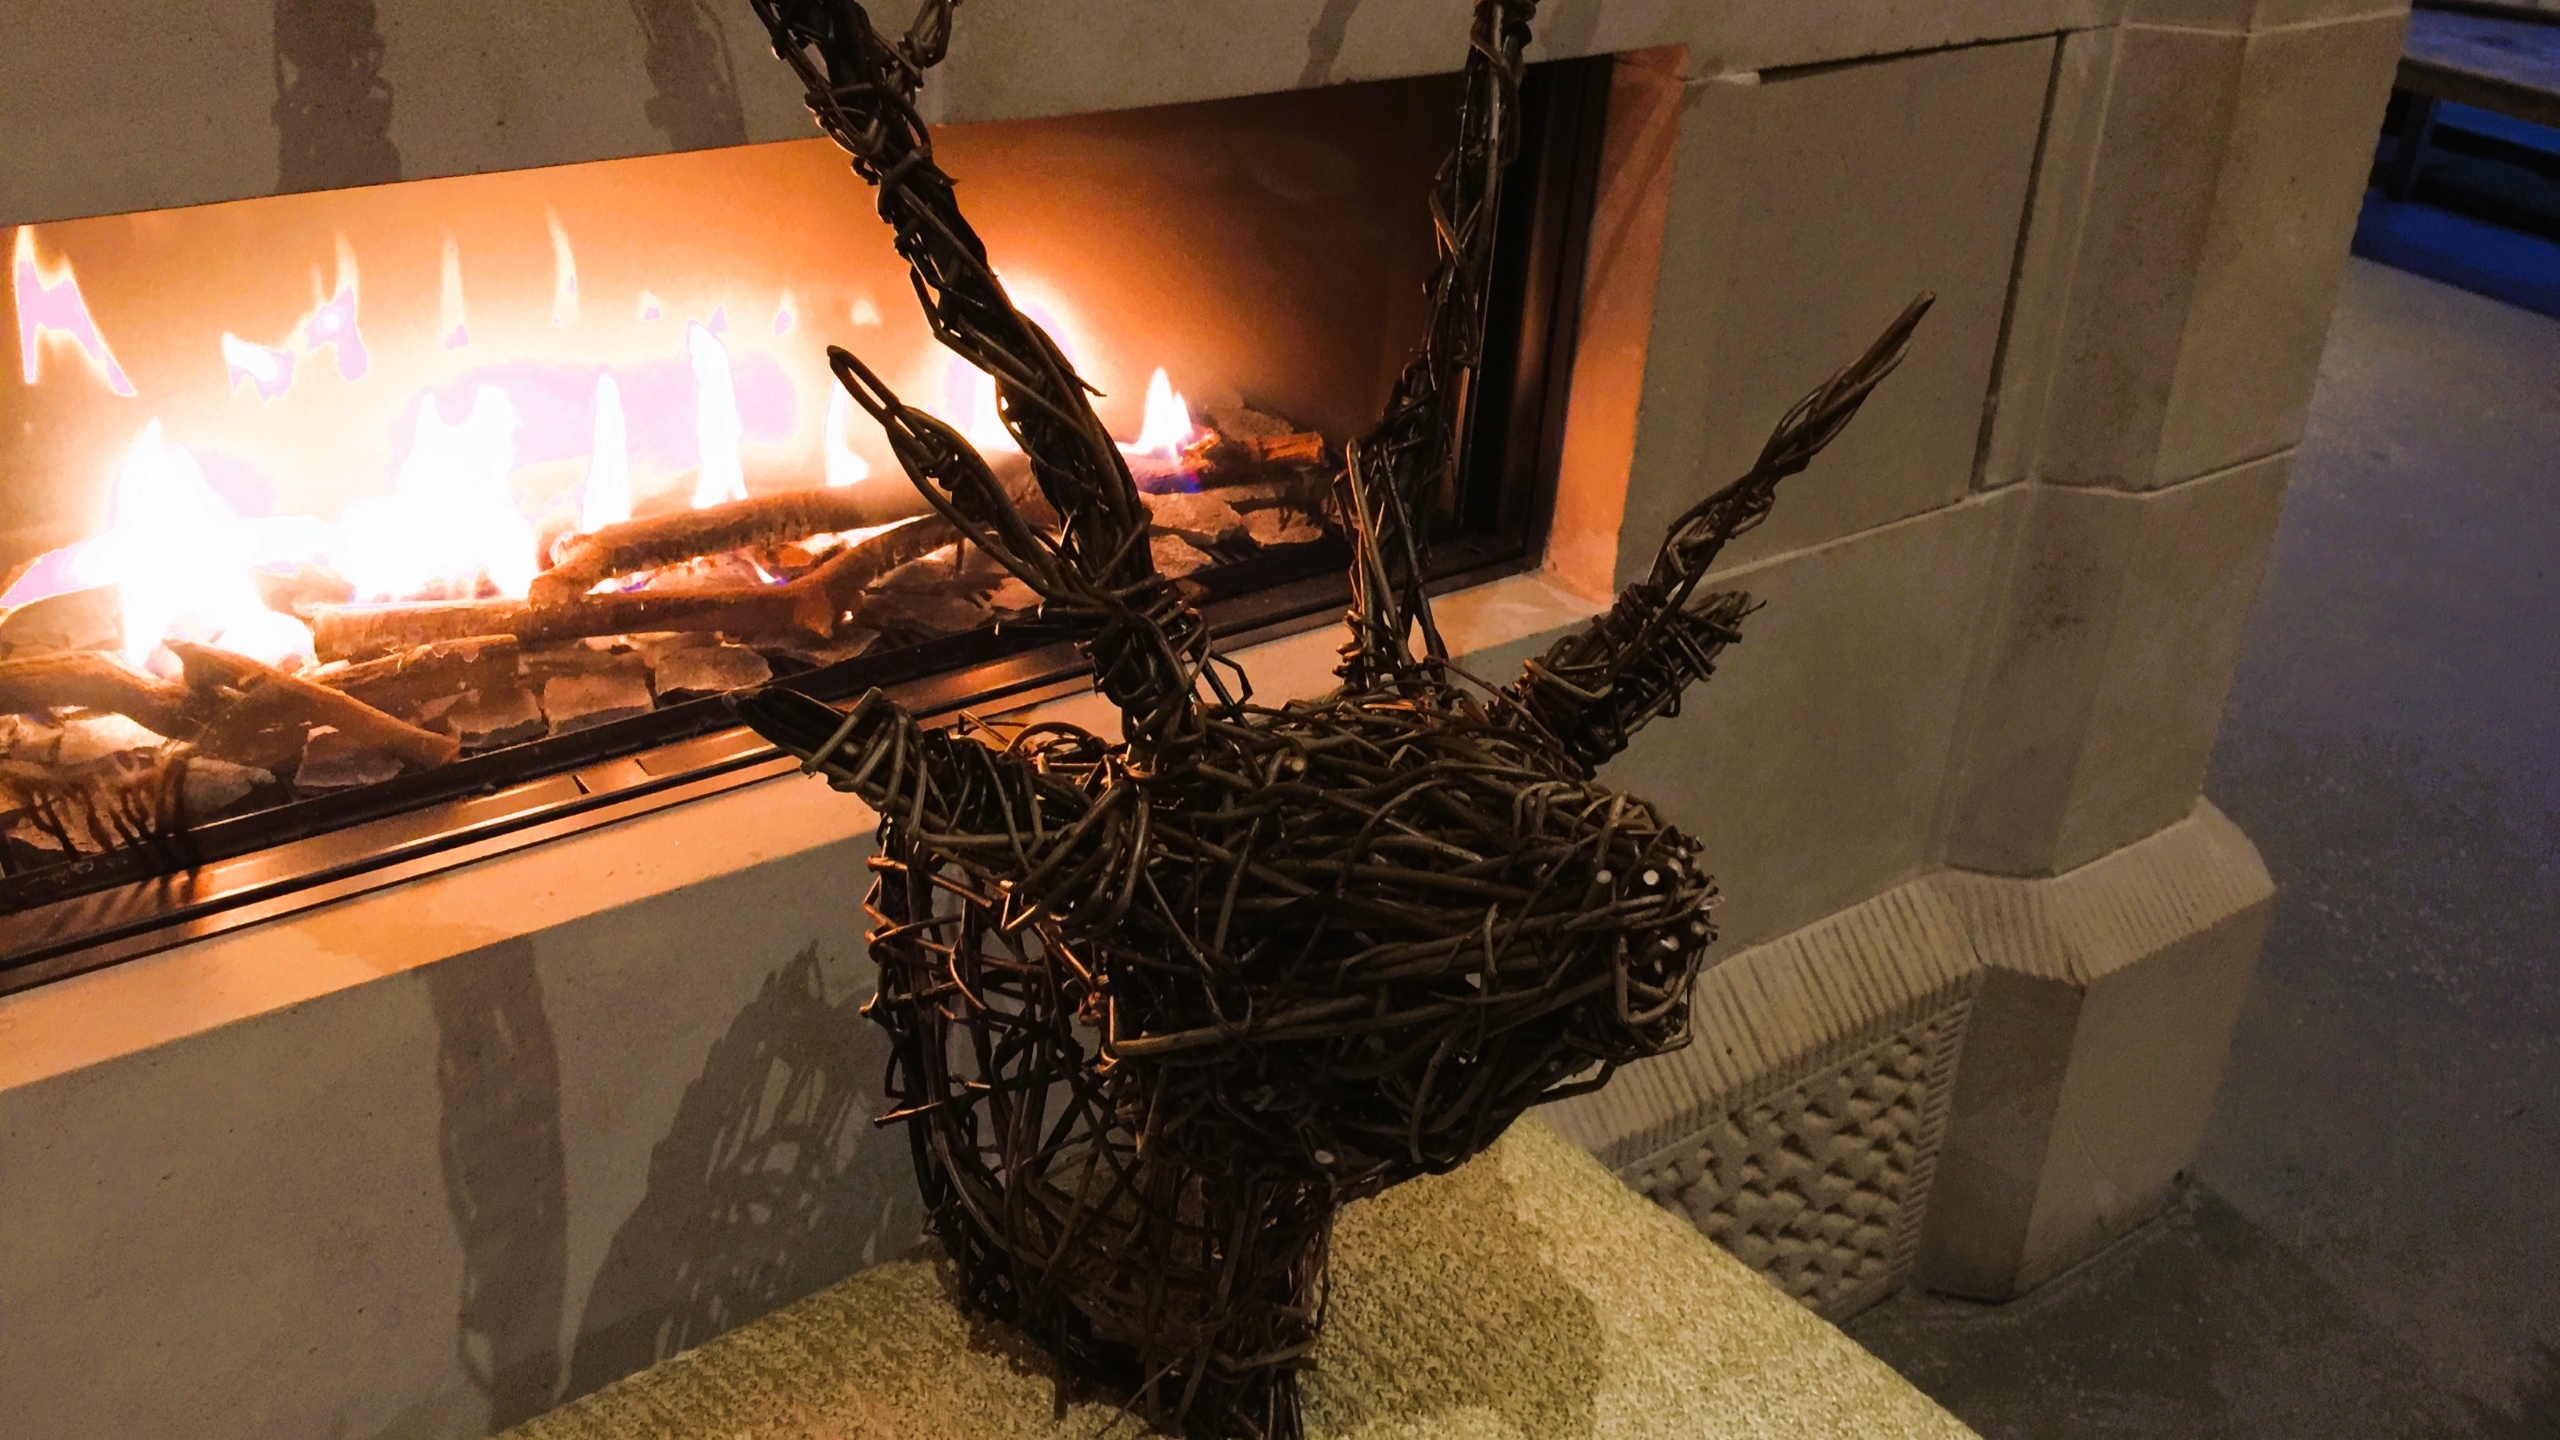 A willow stags head made during an arts and crafts workshop at Swinton Estate in North Yorkshire